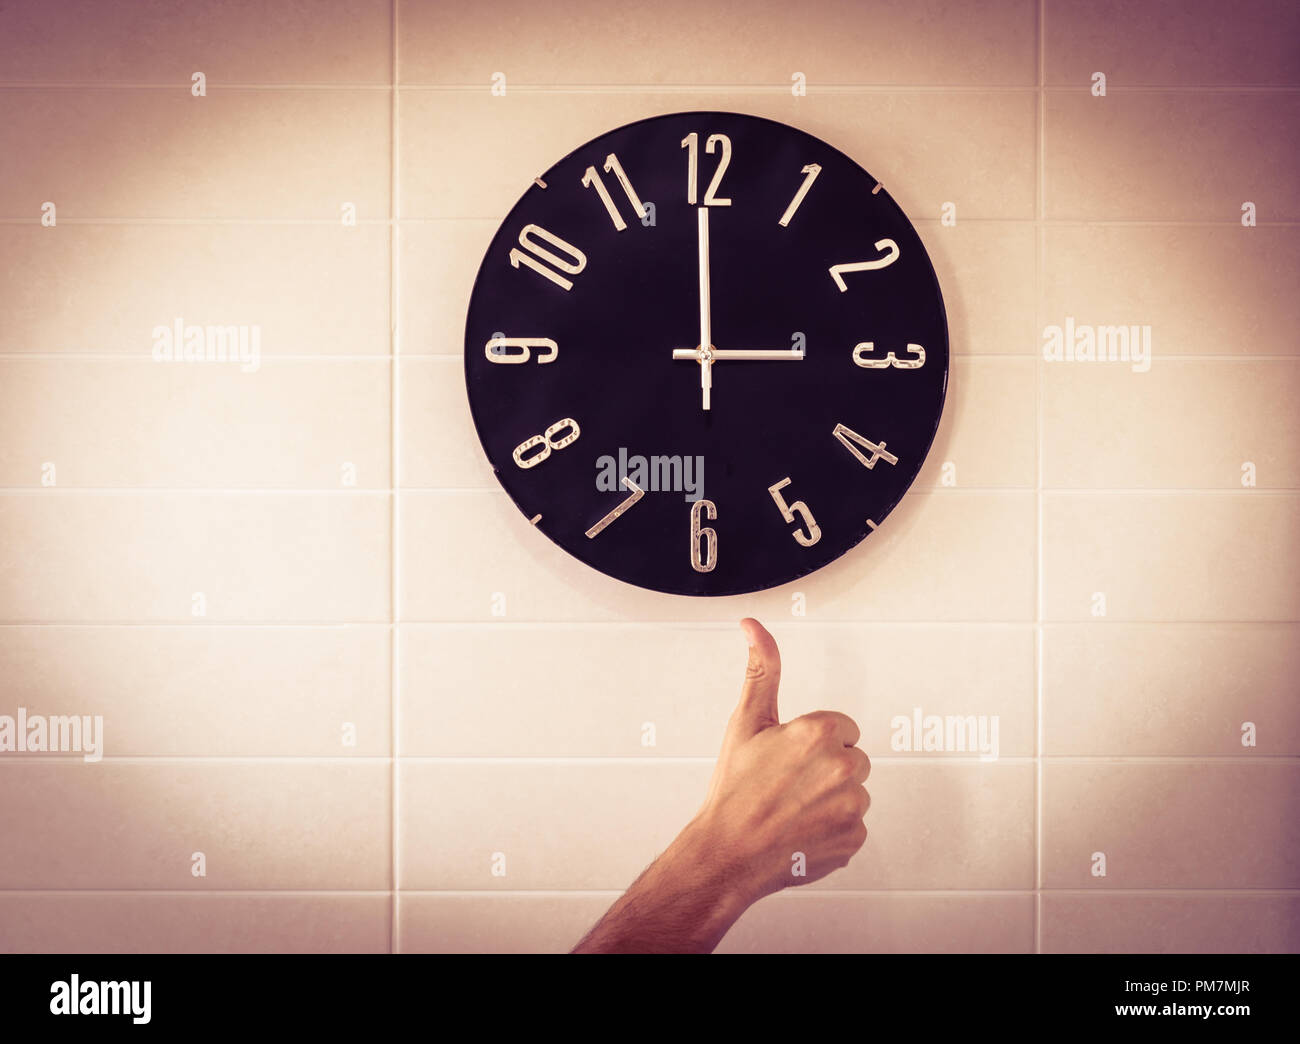 Big black clock on white wall. Time change. DST. Survey of the European Union on time change. Gesture of agreement. Thumb up of Caucasian man. Stock Photo